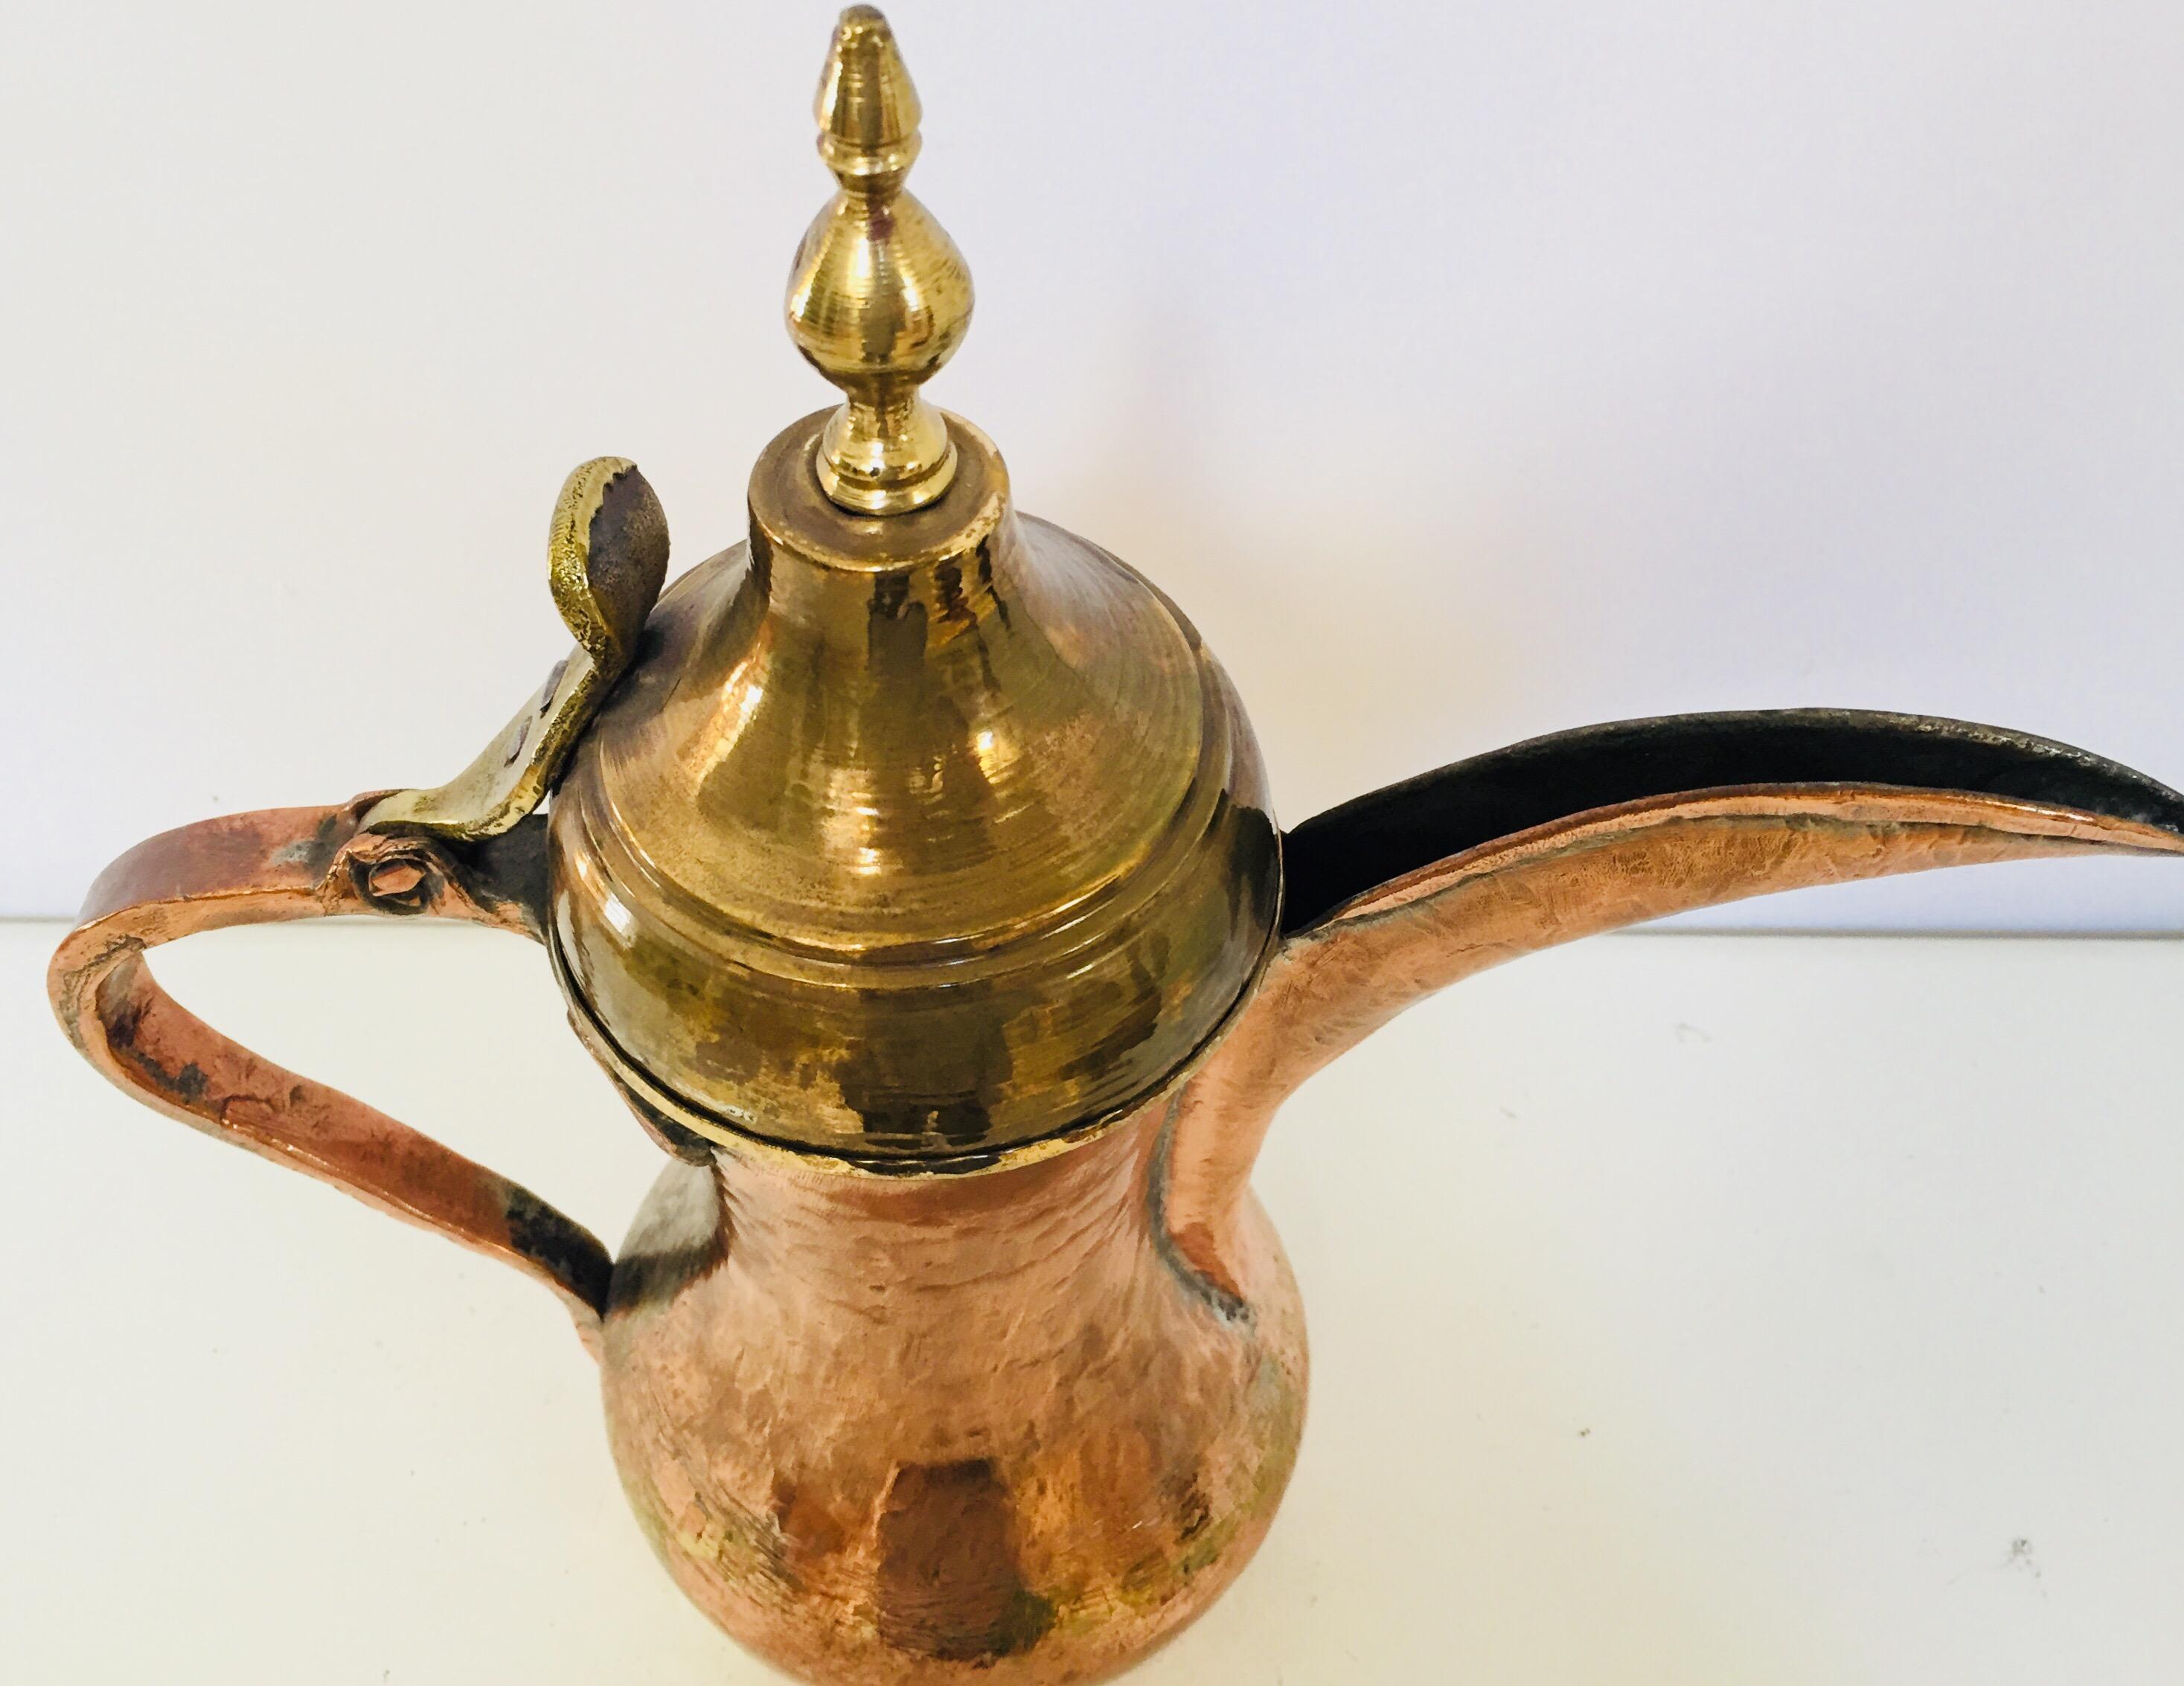 19th century Middle Eastern Arabian tinned copper Dallah coffee pot.
Antique decorative Arabic coffee pot hand-hammered and chased copper with riveted brass finish.
Probably from Oman. Moorish tribal design on top.
Great brass decorative Islamic